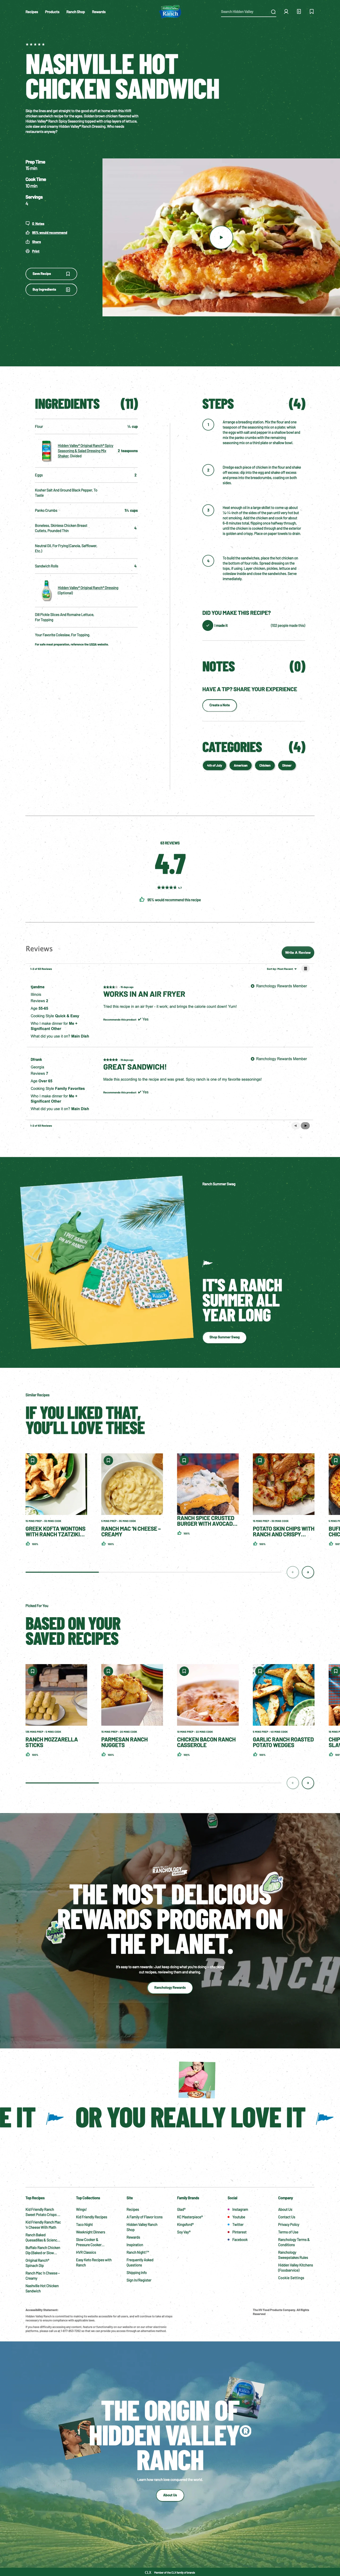 Hidden Valley Landing Page Example: Check out our recipes, products and, rewards for the full Hidden Valley Ranch experience. We have all the content you need to fulfill your love for ranch!